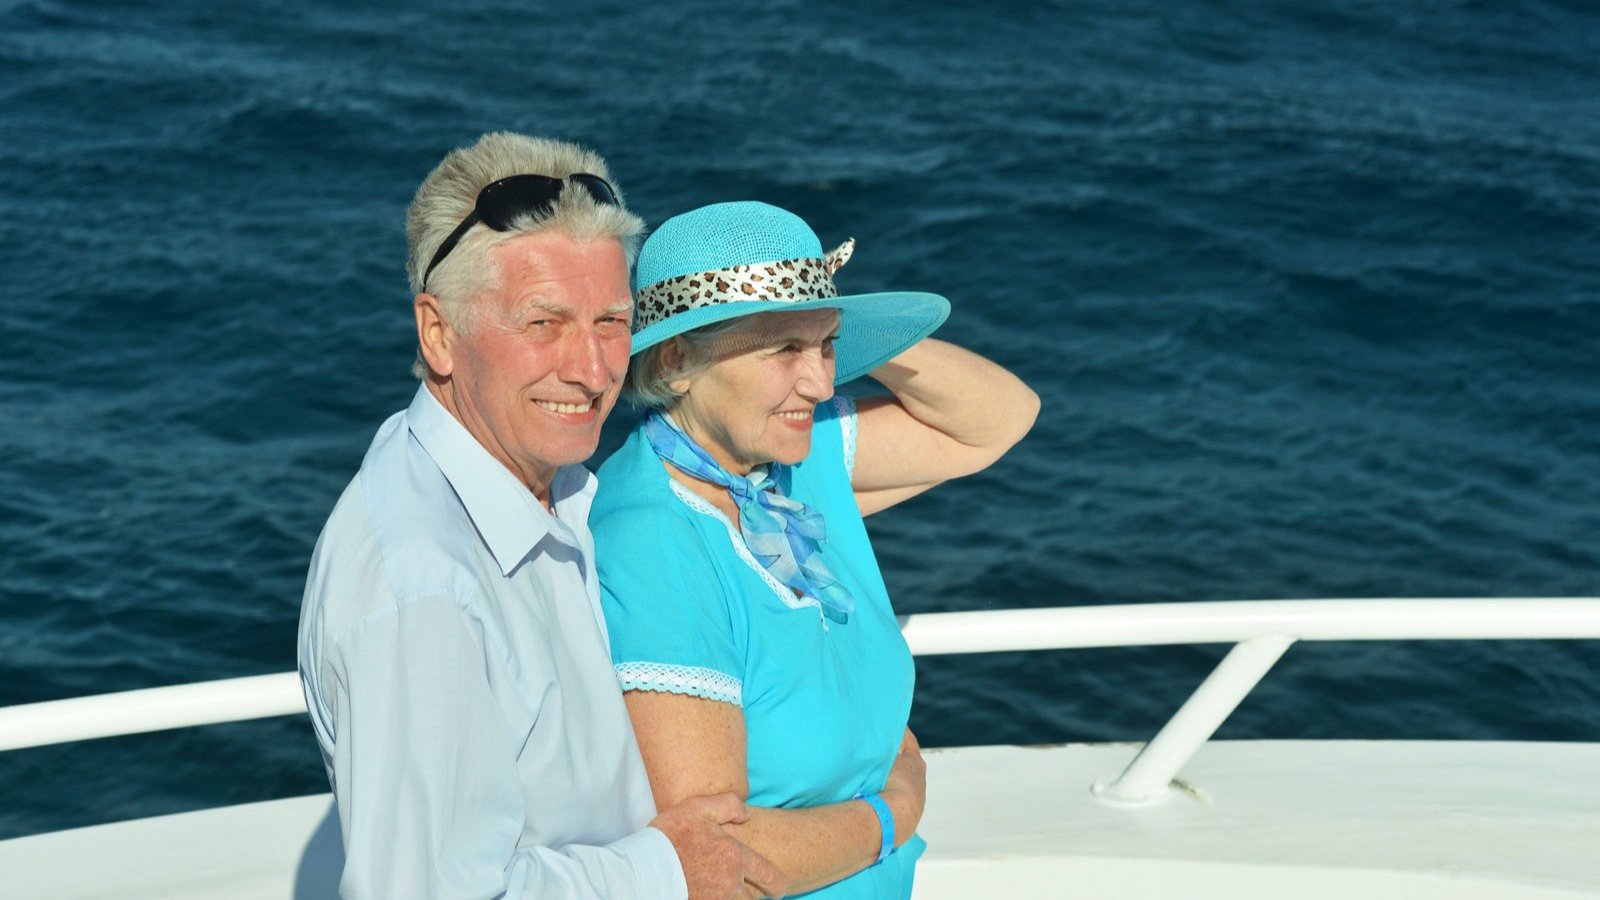 <p>Cruises can be extremely fun since you can bring so many passengers along for a party at sea. There are many places to visit when taking a cruise, so going on as many cruises as possible is essential to many baby boomers. Cruises can be cheap and easy, so many choose to take one.</p>